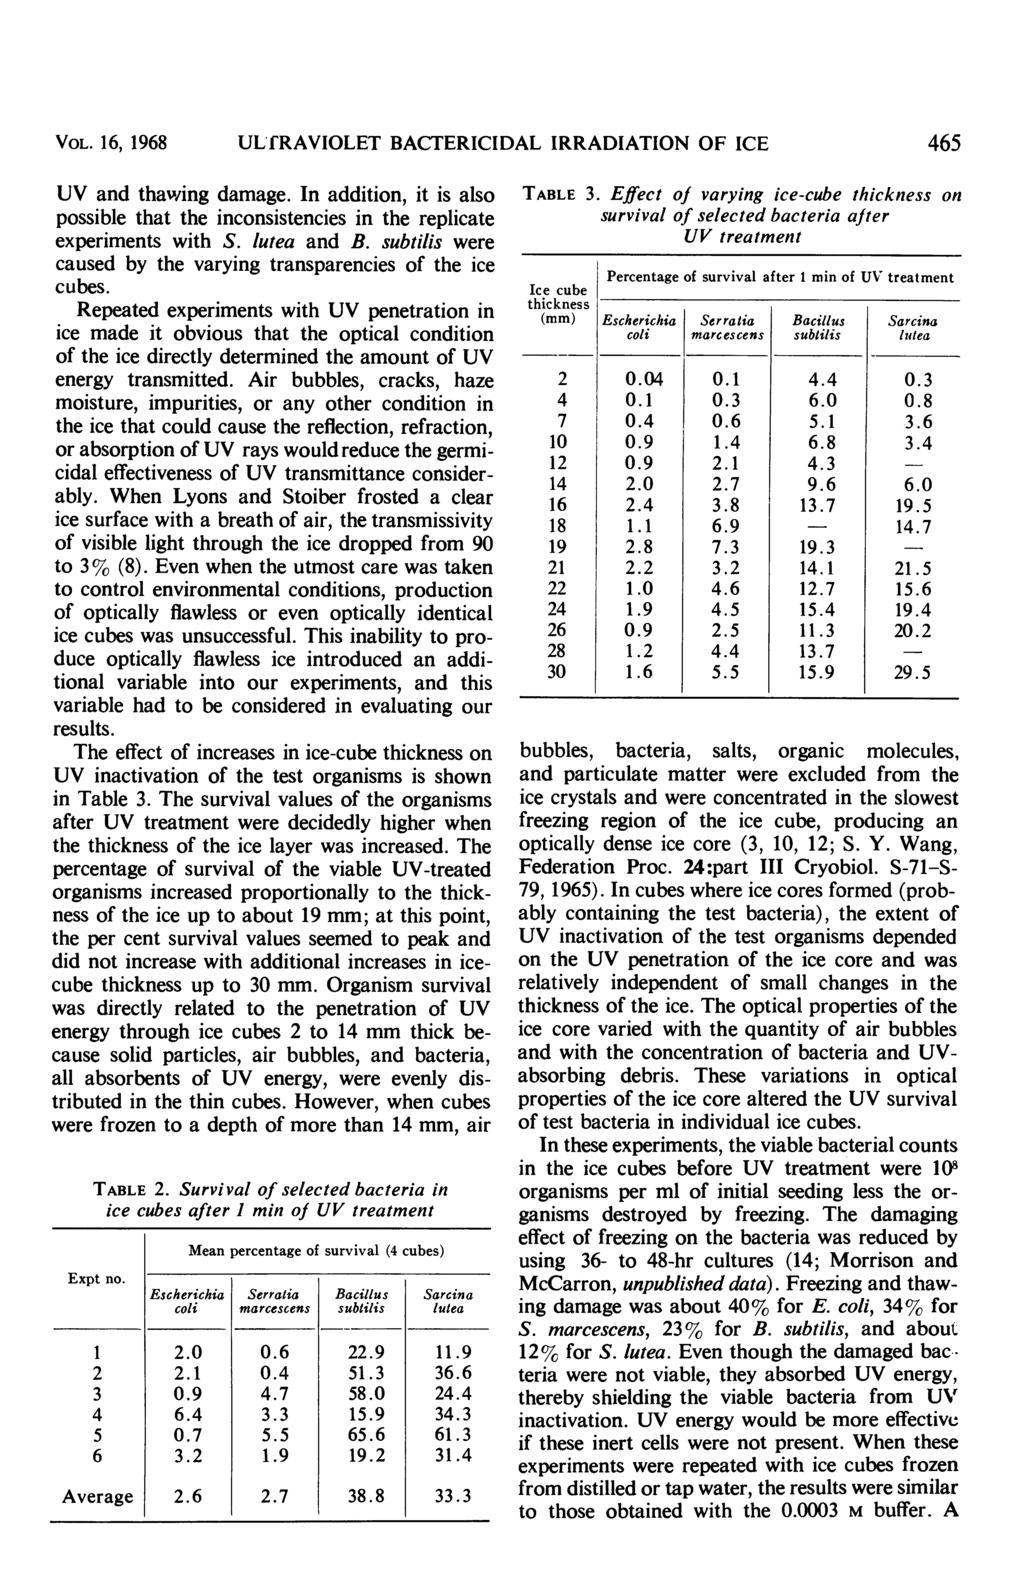 VOL. 16, 1968 ULfRAVIOLET BACTERICIDAL IRRADIATION OF ICE 465 UV and thawing damage. In addition, it is also possible that the inconsistencies in the replicate experiments with S. lutea and B.